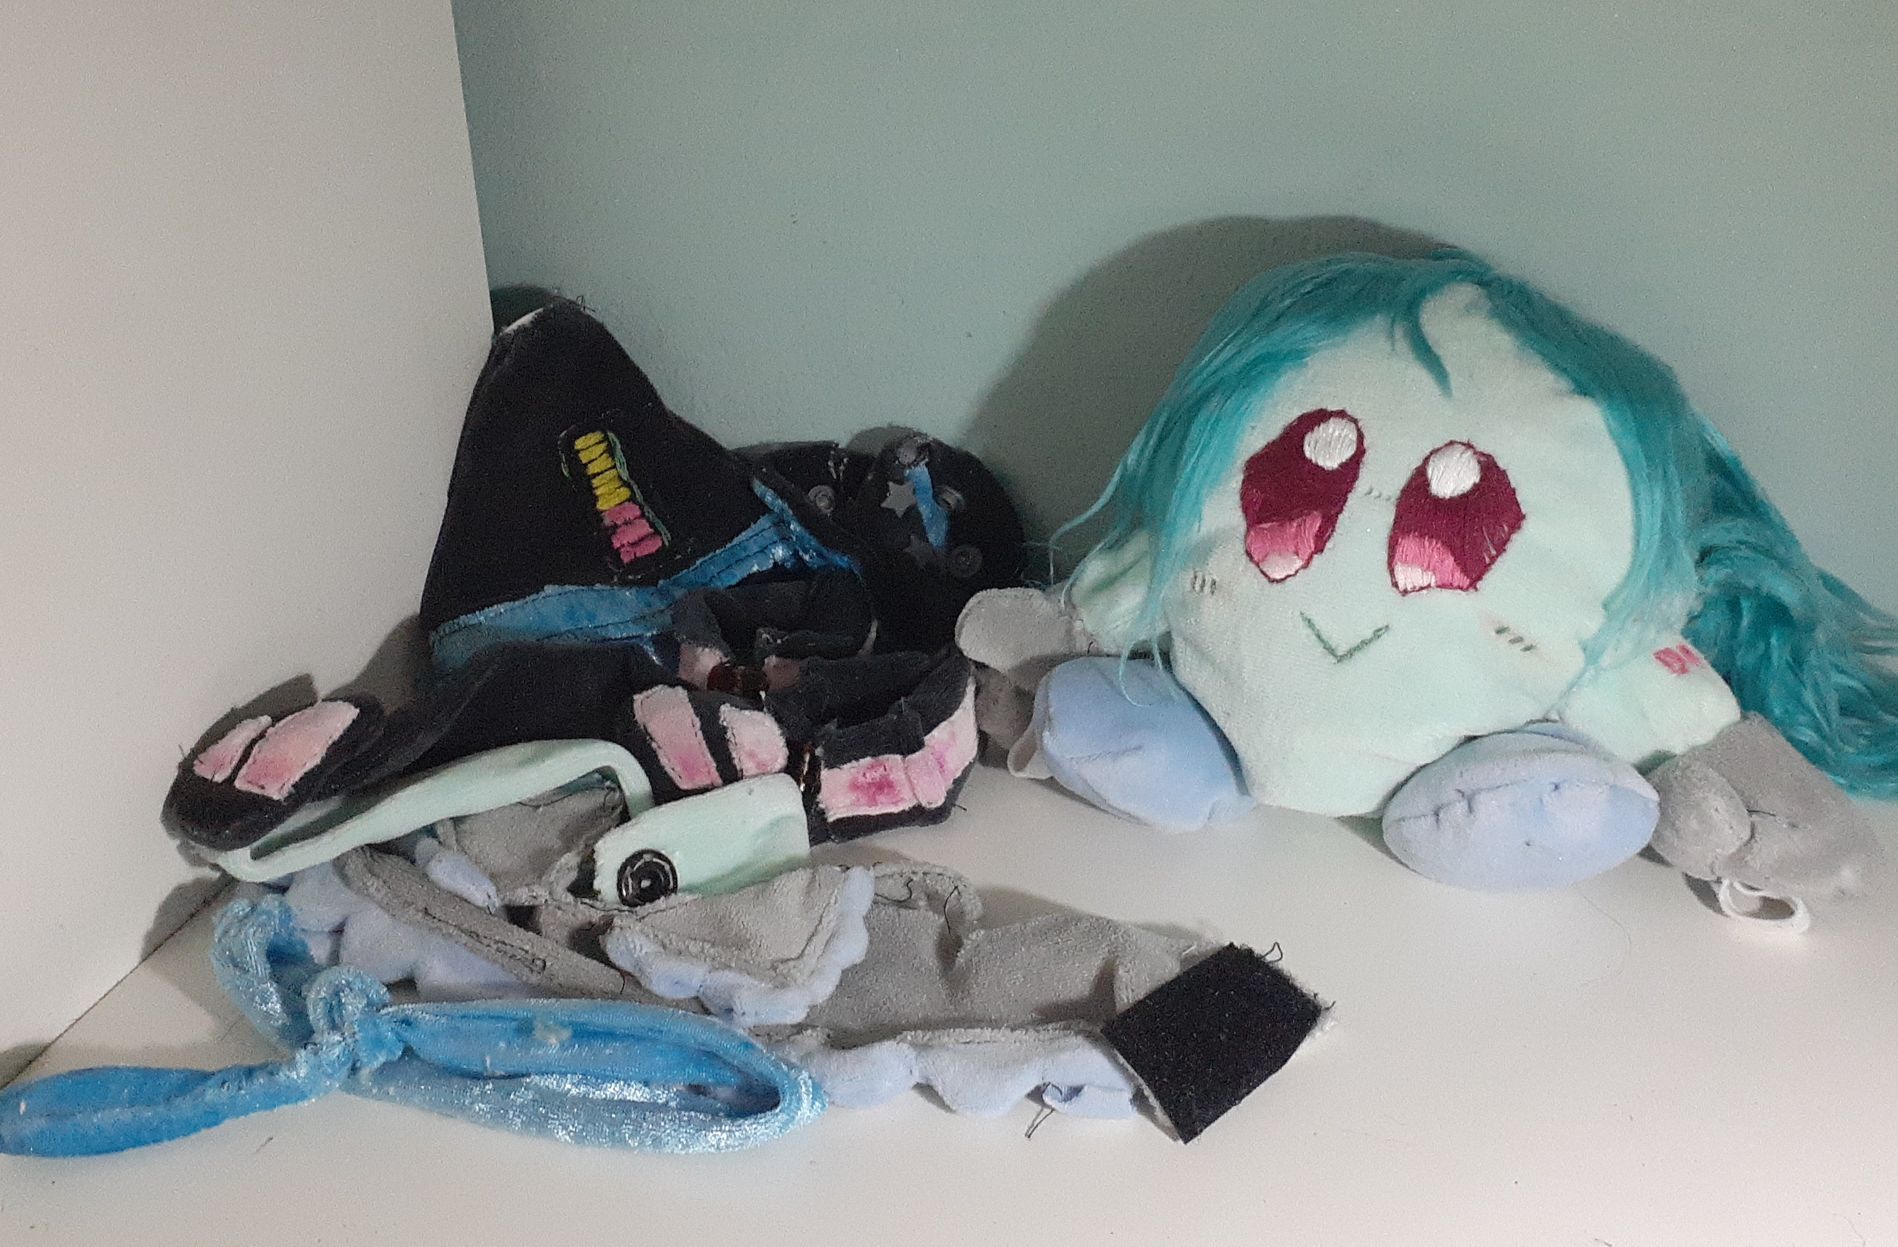 Puffball Hatsune Miku, unclothed